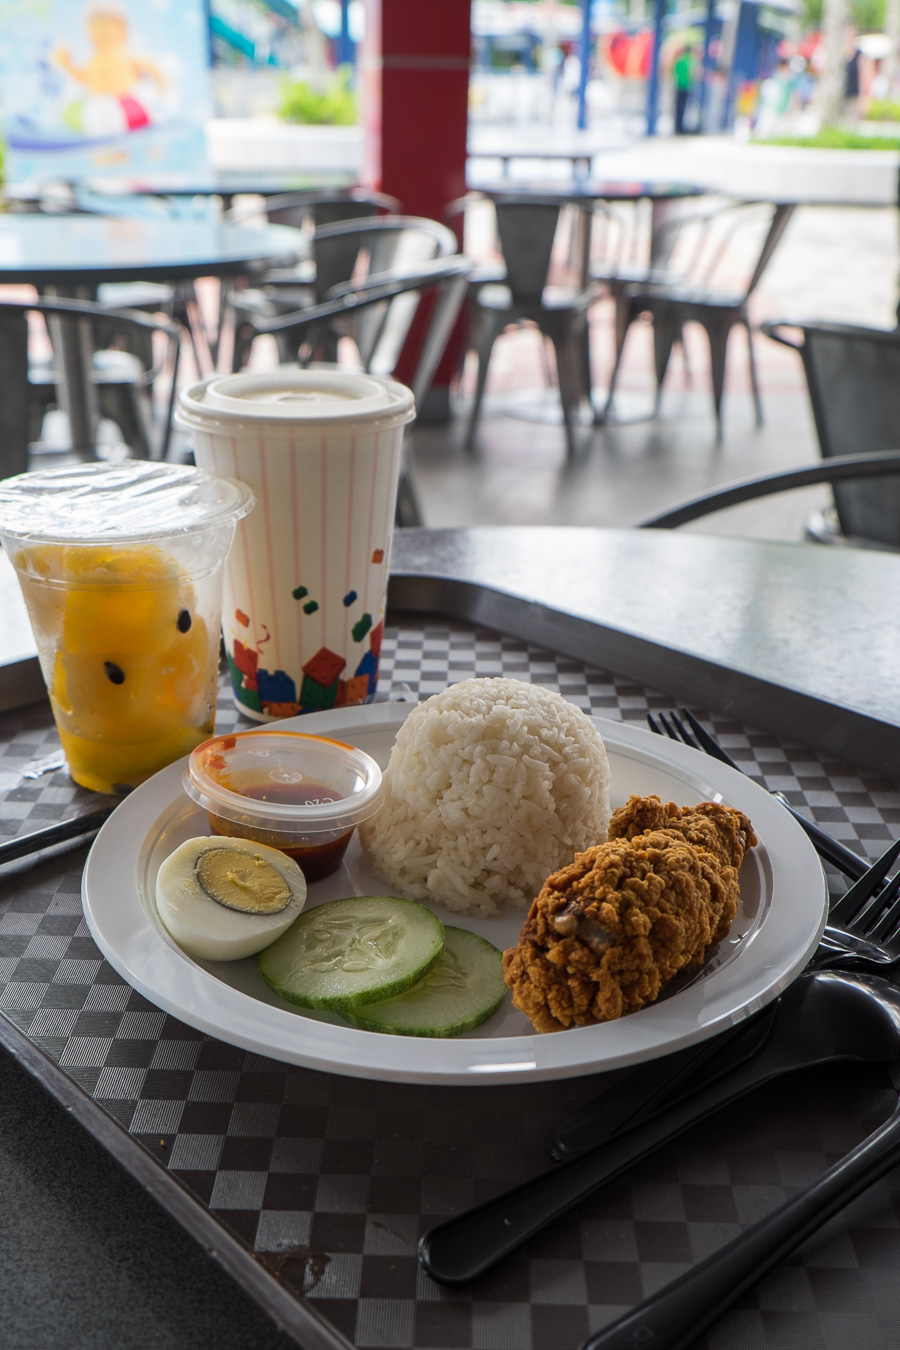 Nasi lemak combo with fruit cup and drink